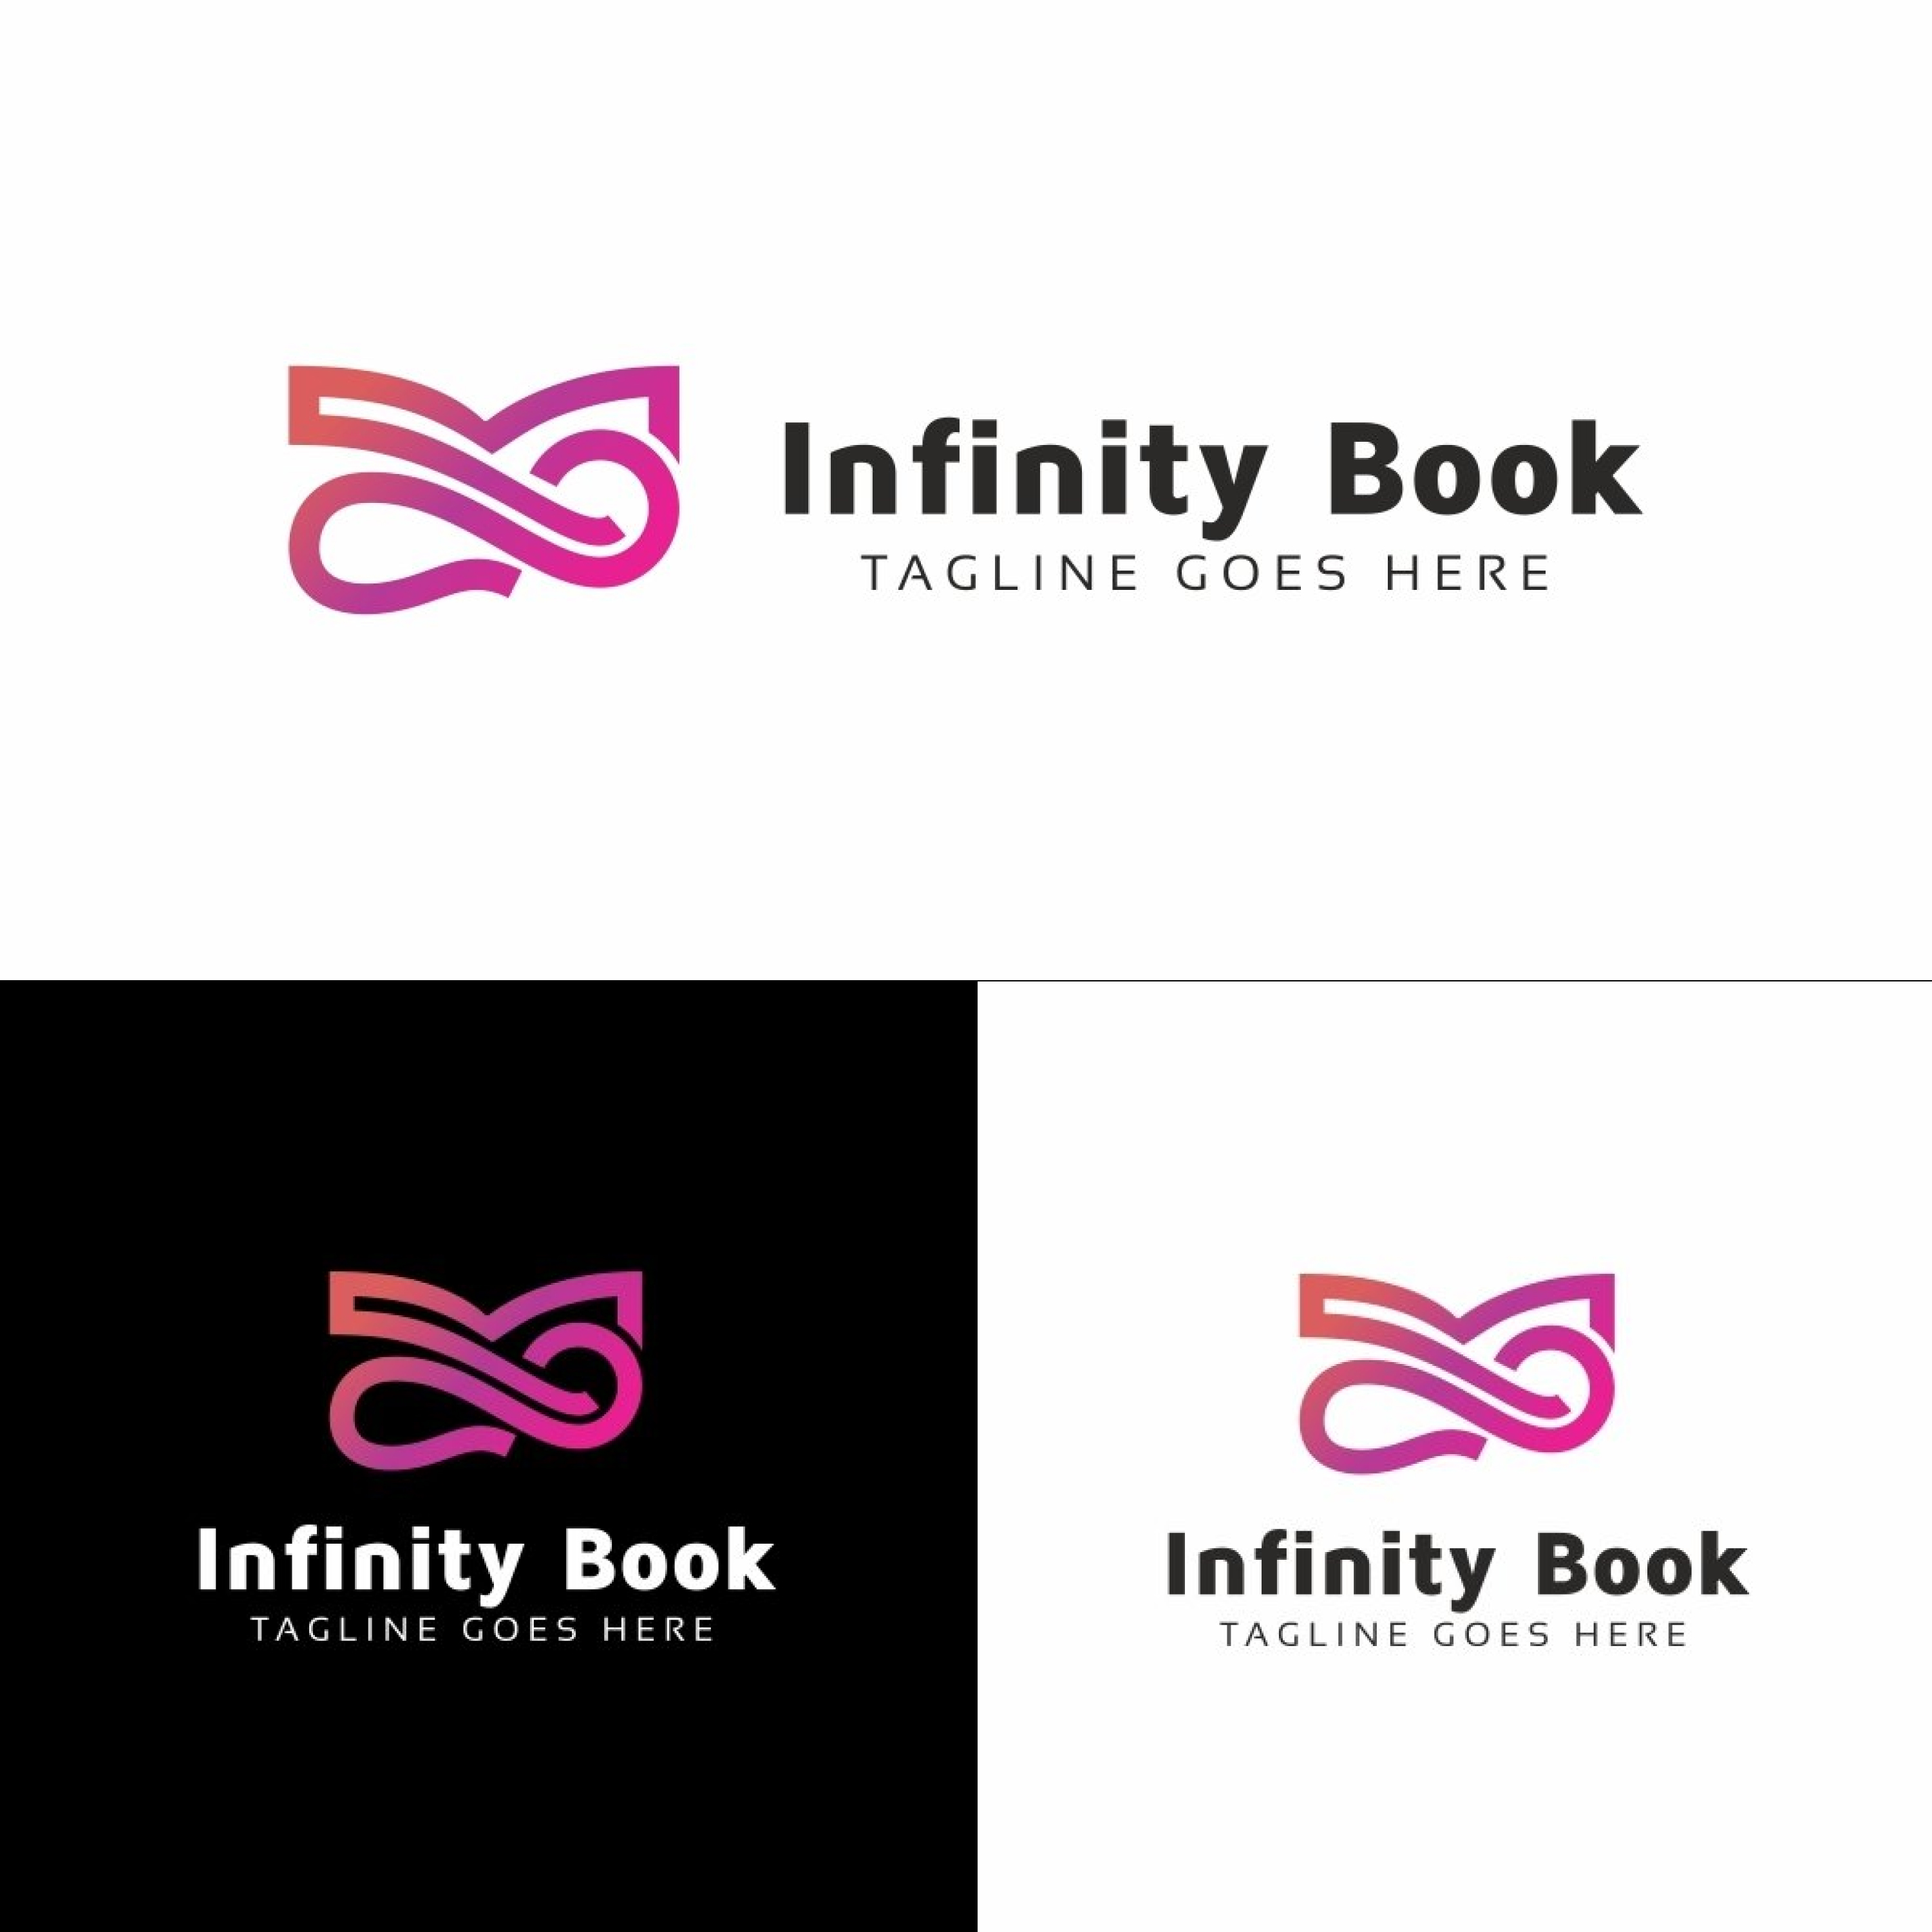 Preview infinity book logo.